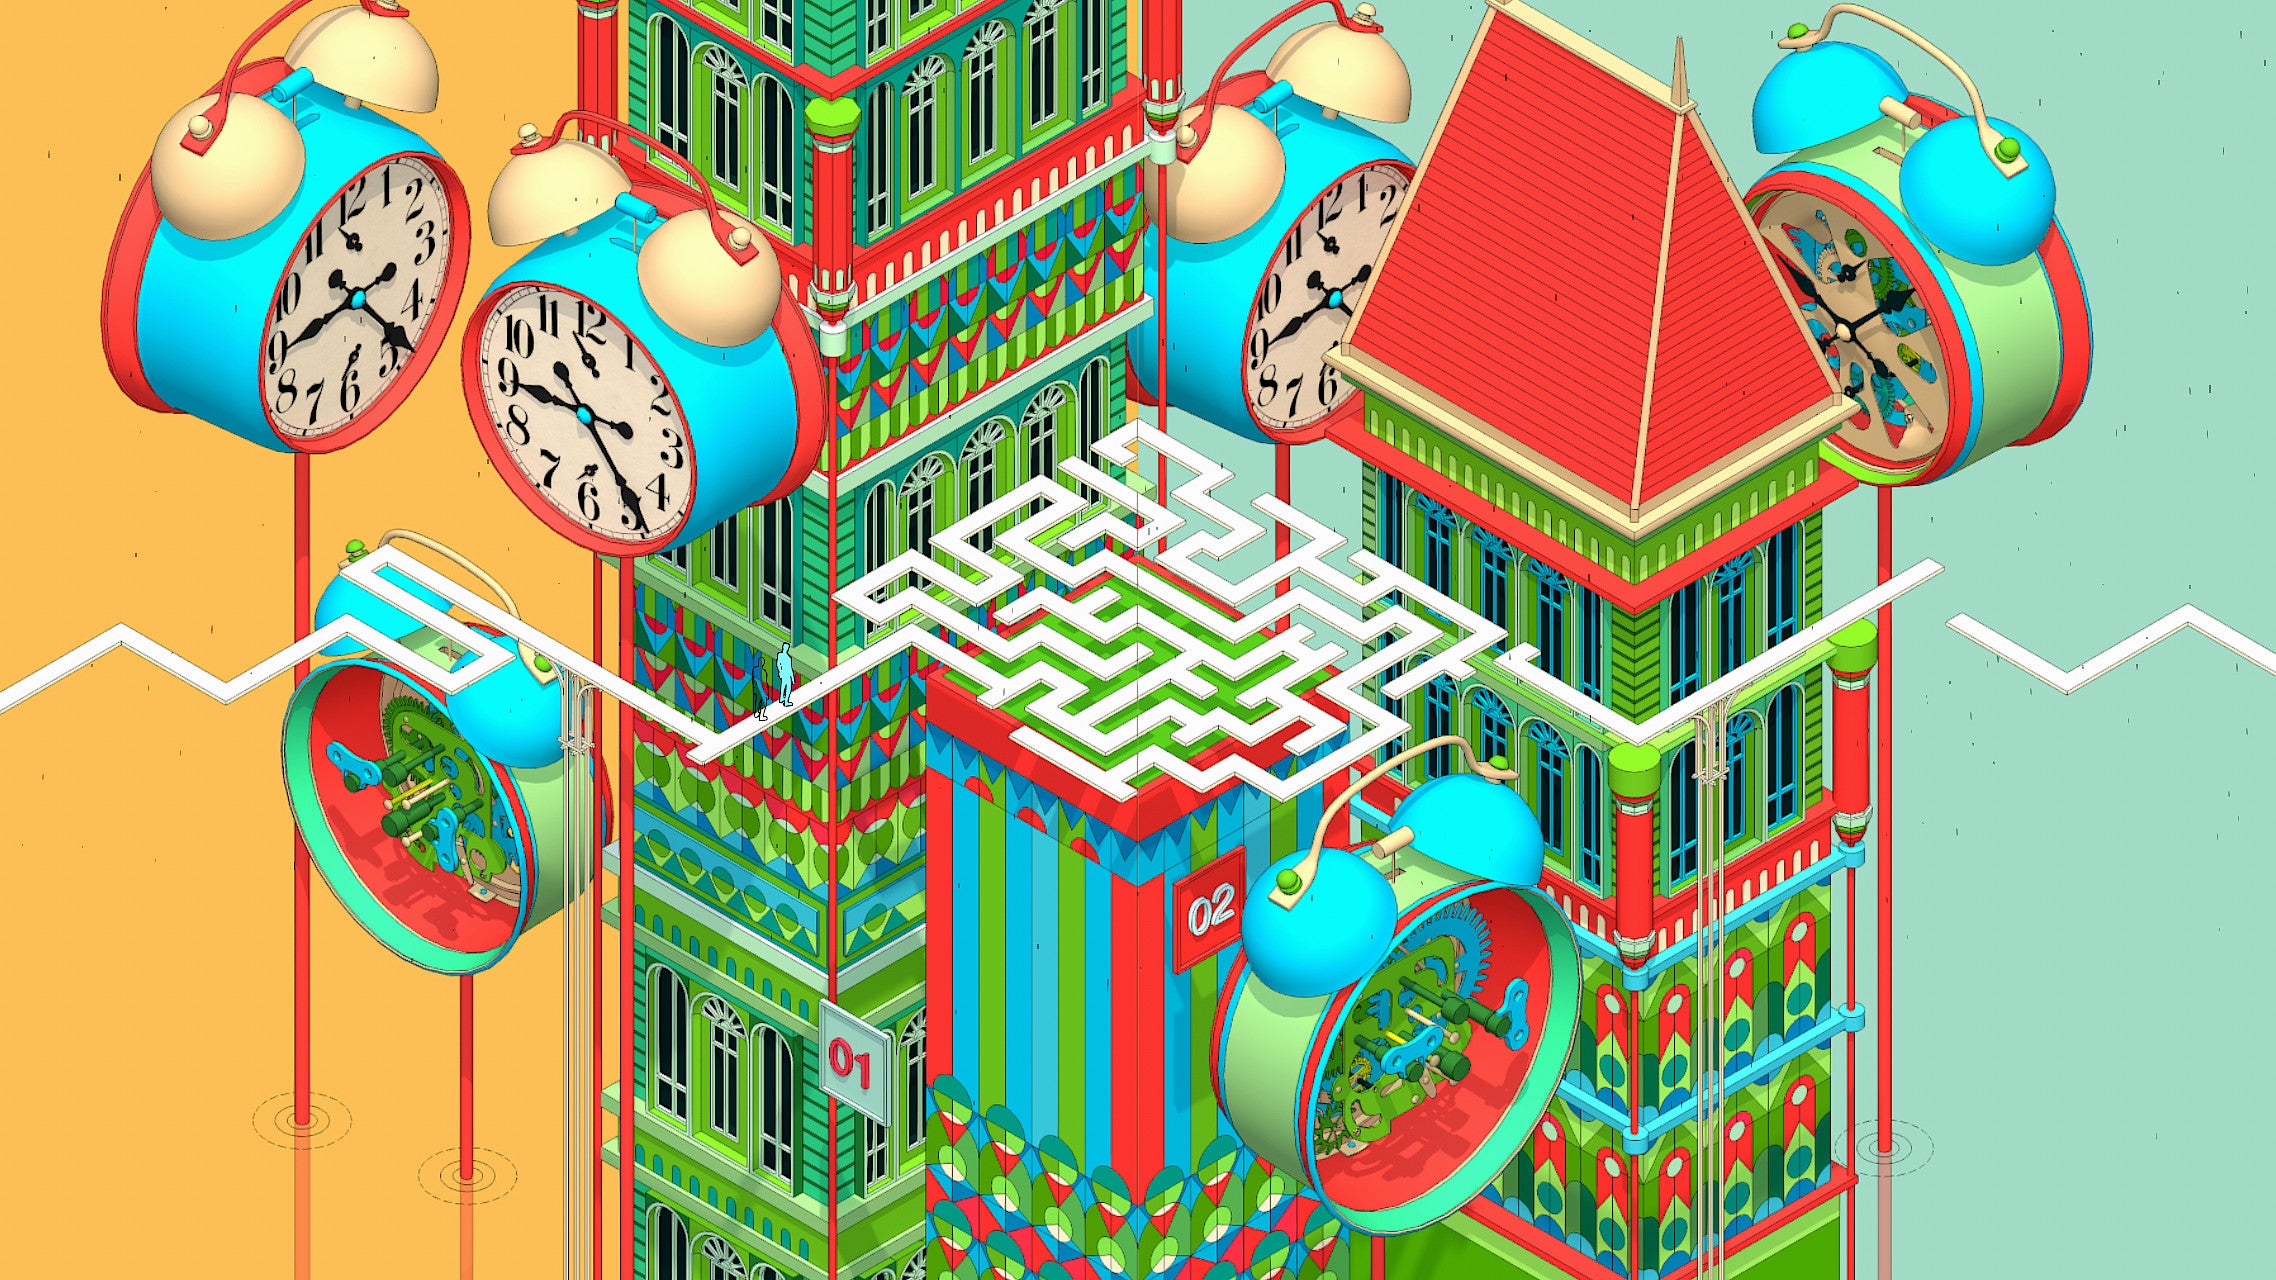 A maze amidst colourful architecture of towers and clocks in a screenshot from Folds of a Separation.